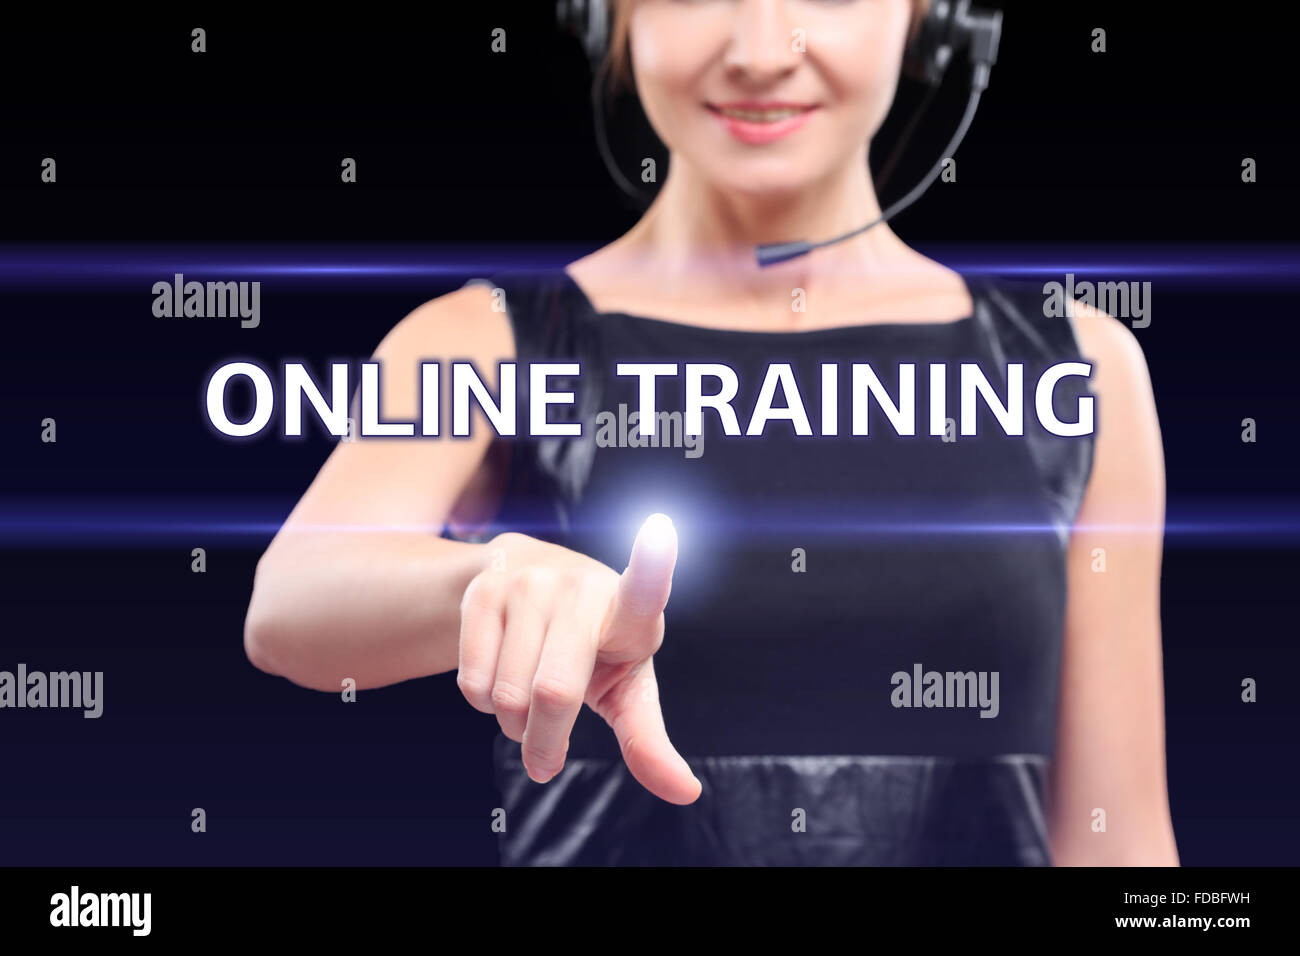 business, technology, internet and networking concept - businesswoman pressing online training button on virtual screens Stock Photo